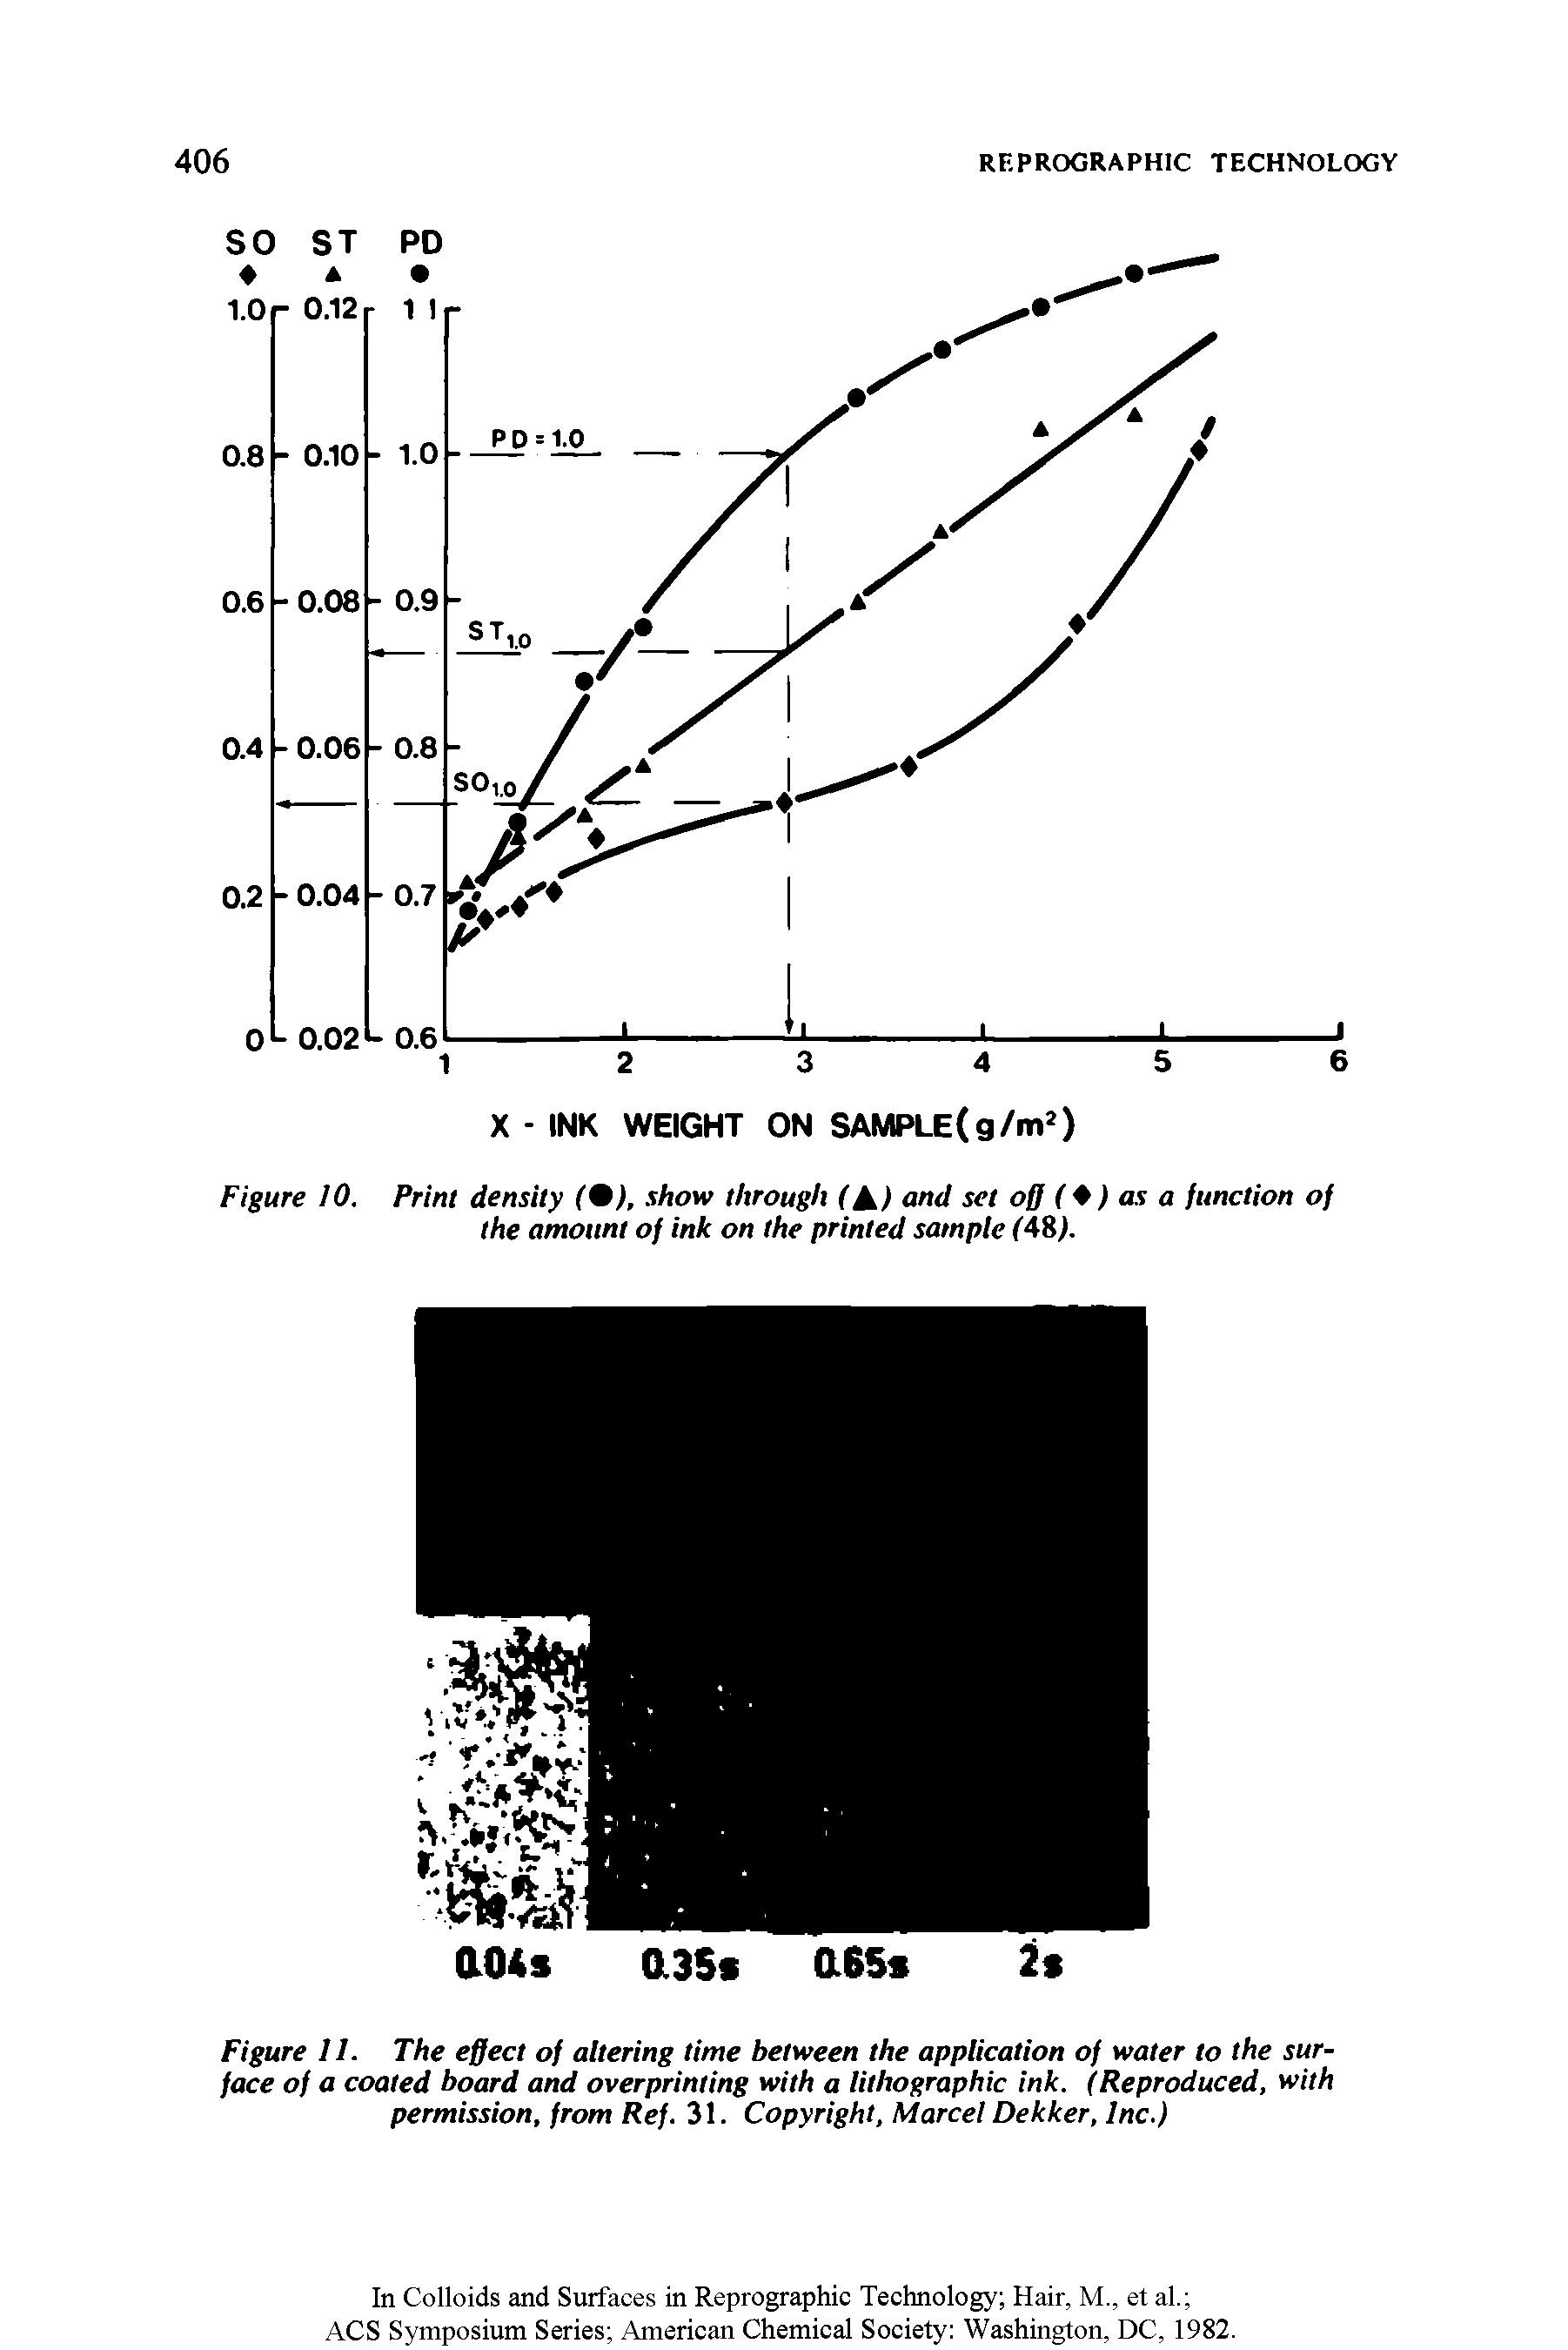 Figure 10. Print density (9), show through (A) and set off ( + ) as a function of the amount of ink on the printed sample (48,).